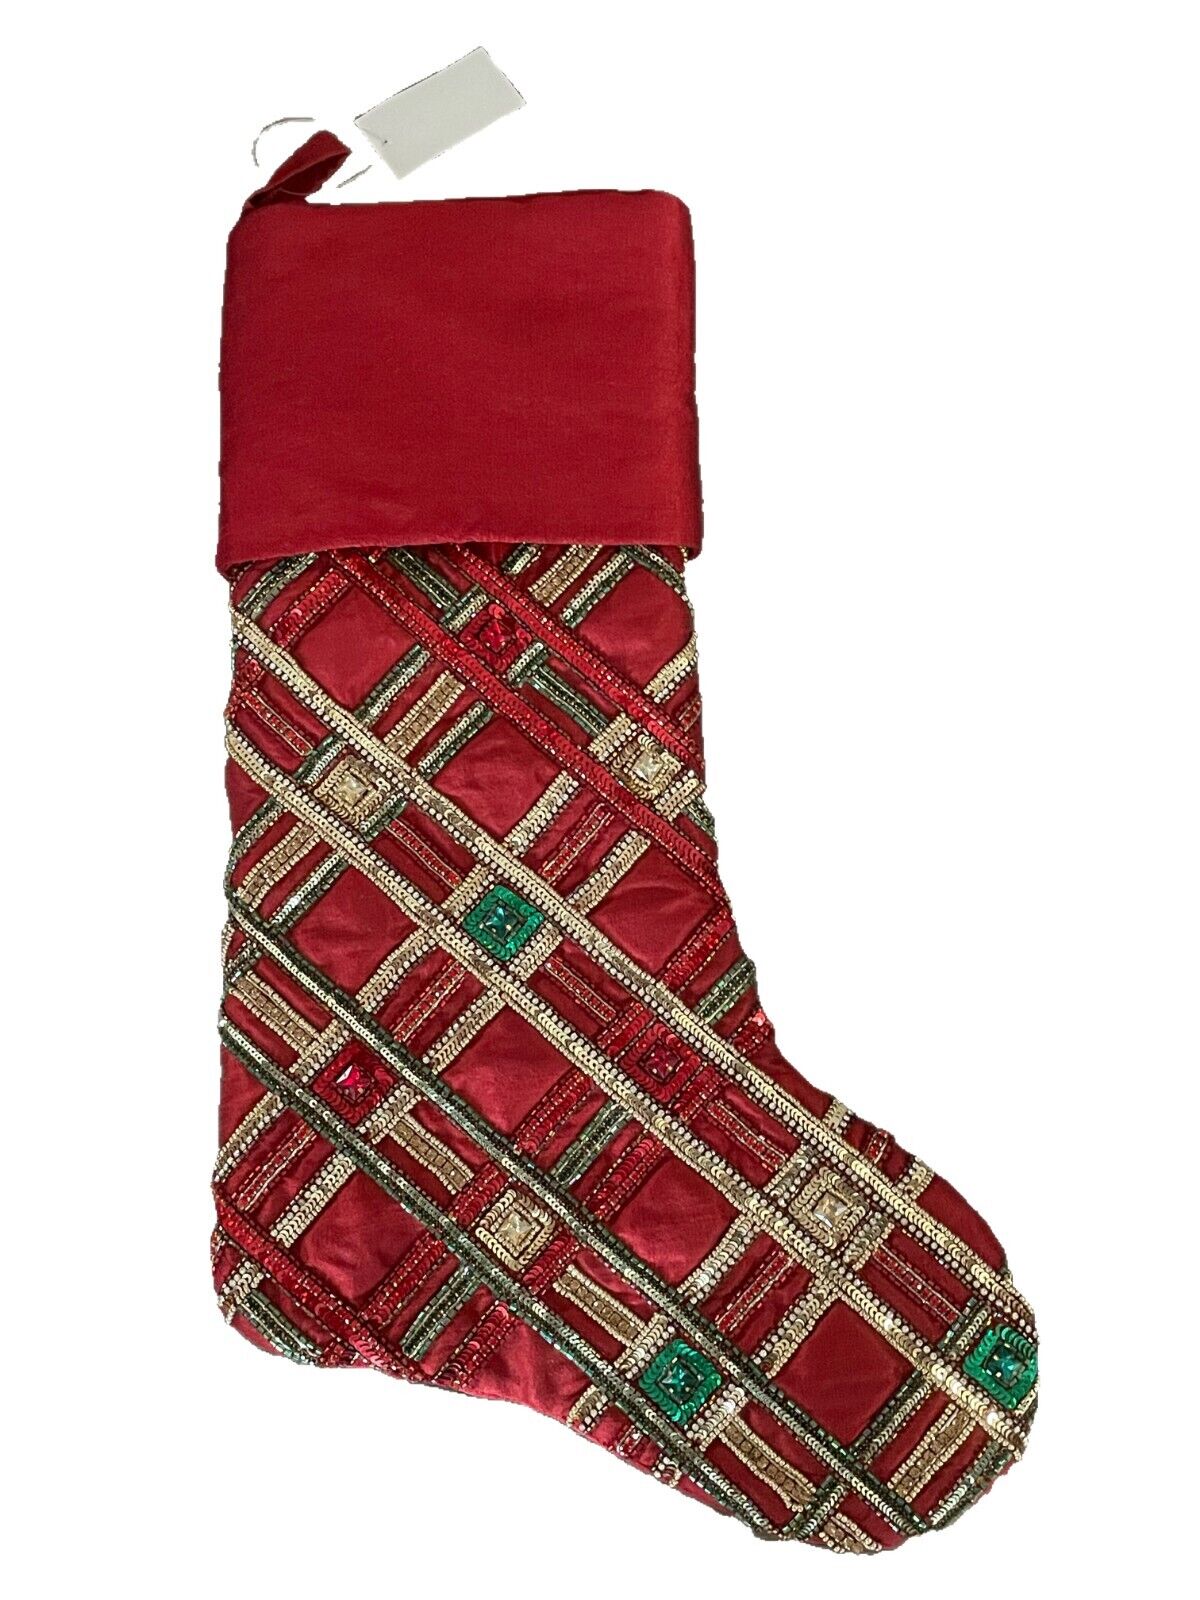 New Neiman Marcus Classic Christmas Tartan Plaid Stocking sold out Rare